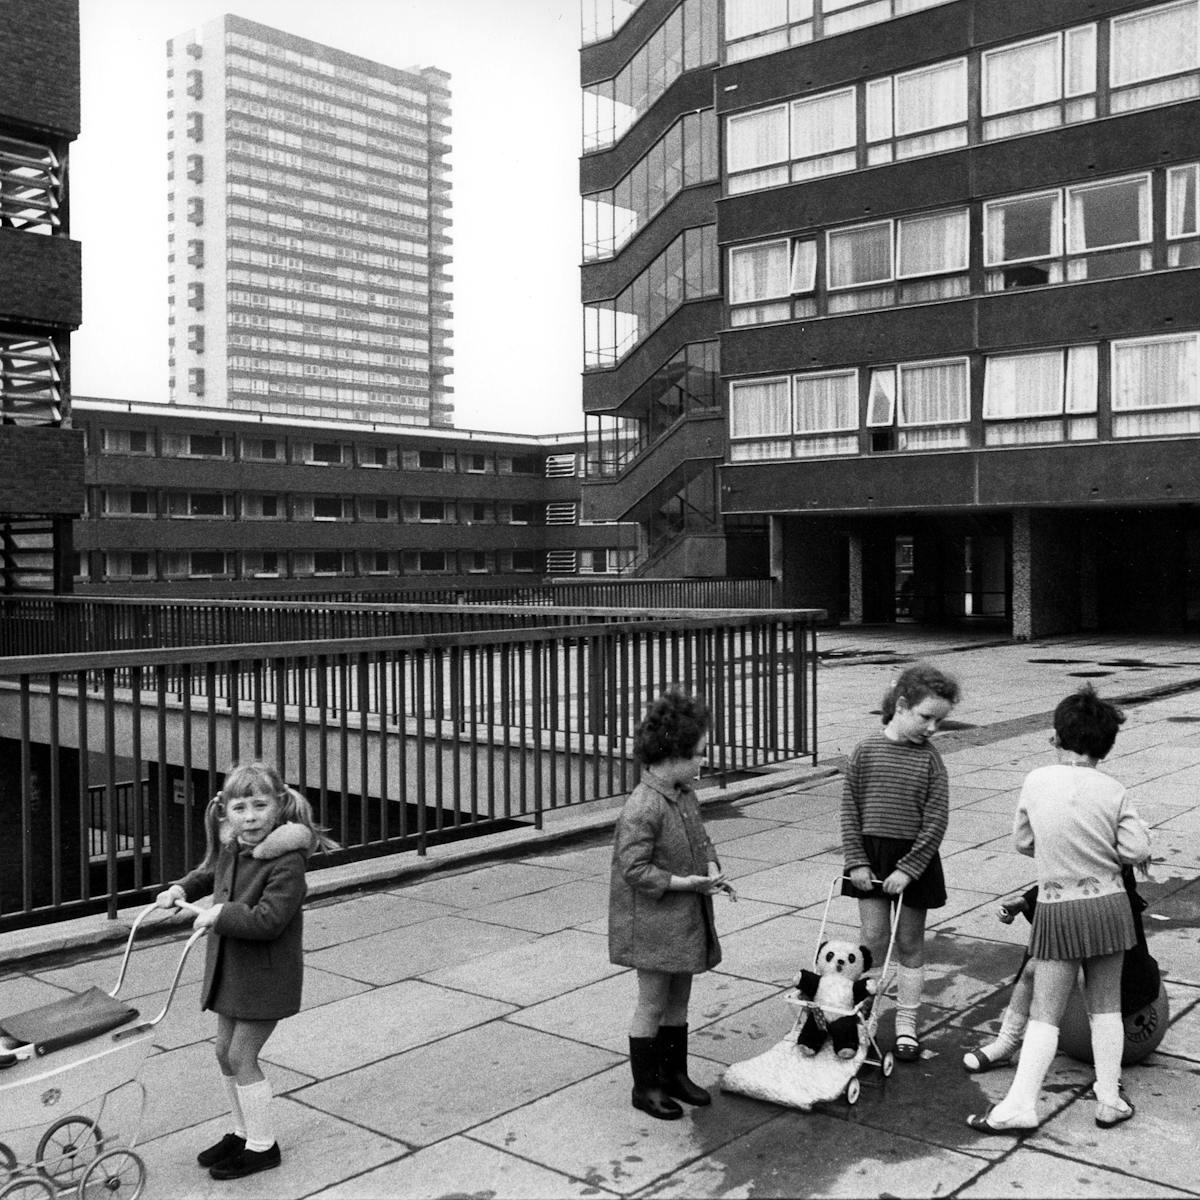 Image of children playing on a raised walkway in Deptford, London